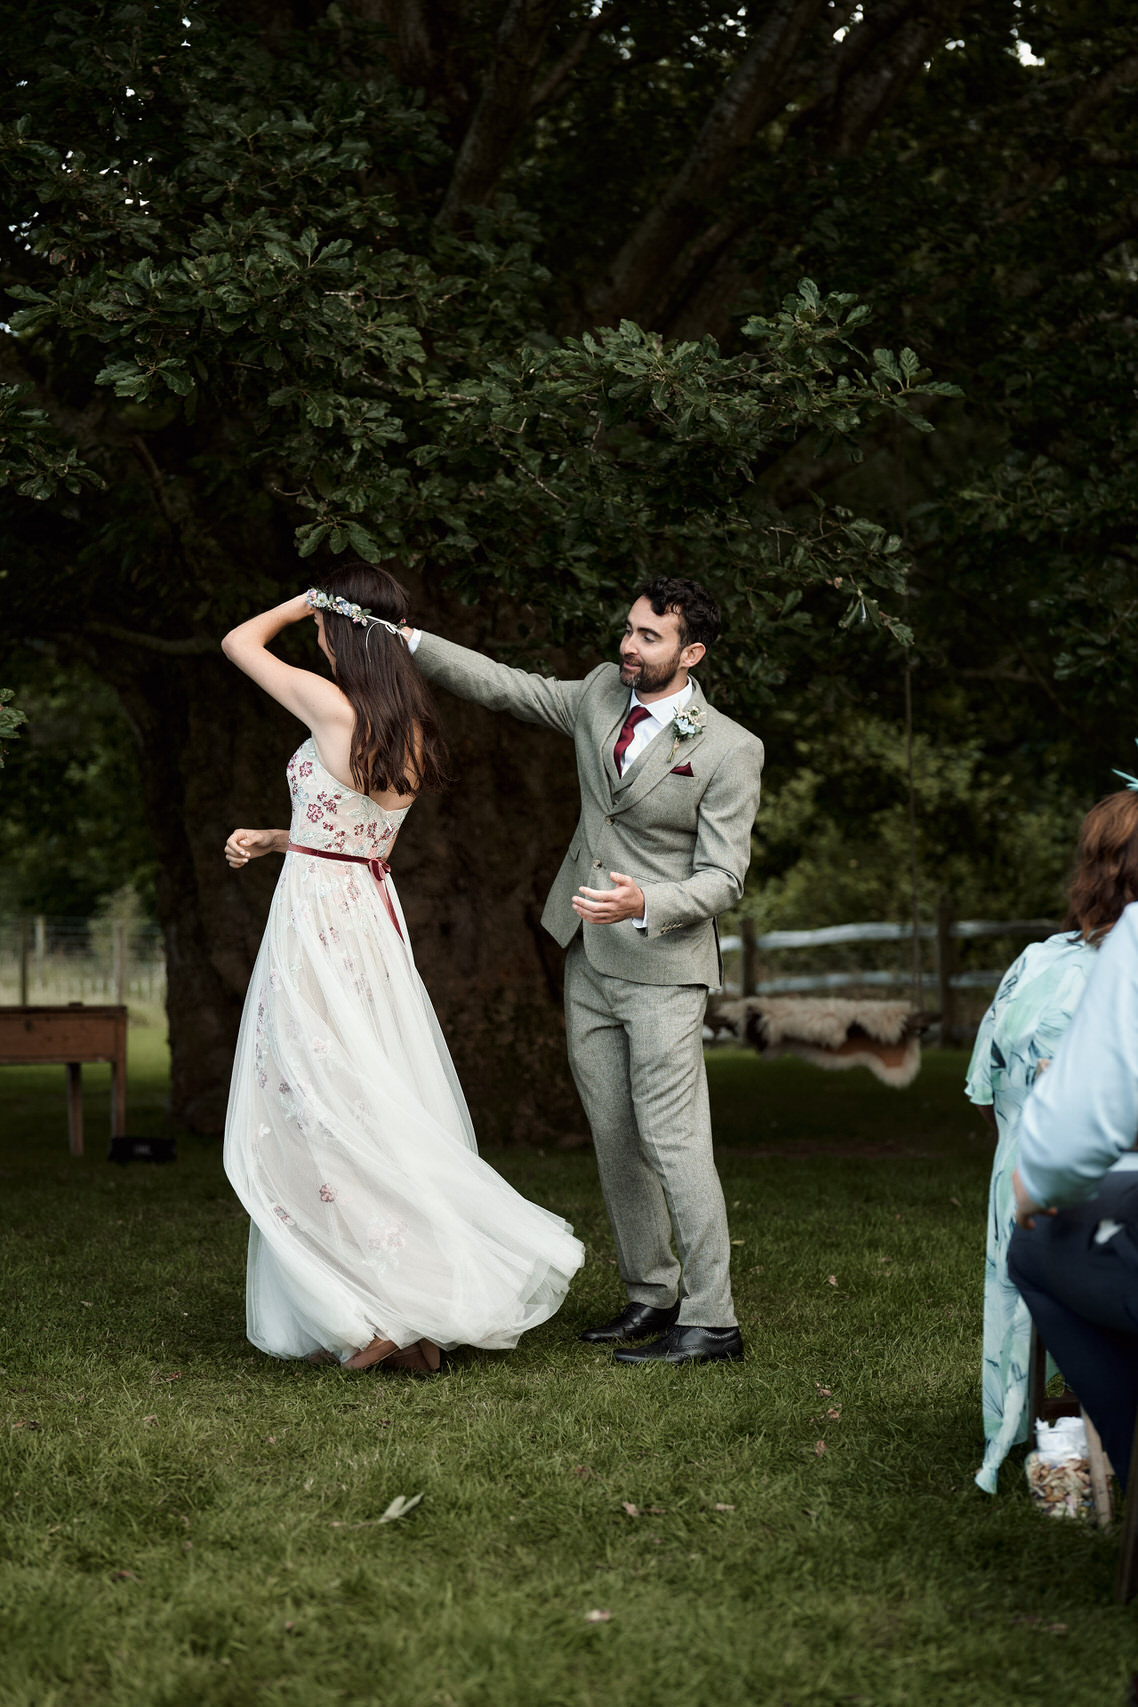 A couple getting married is dancing in front of a tree.